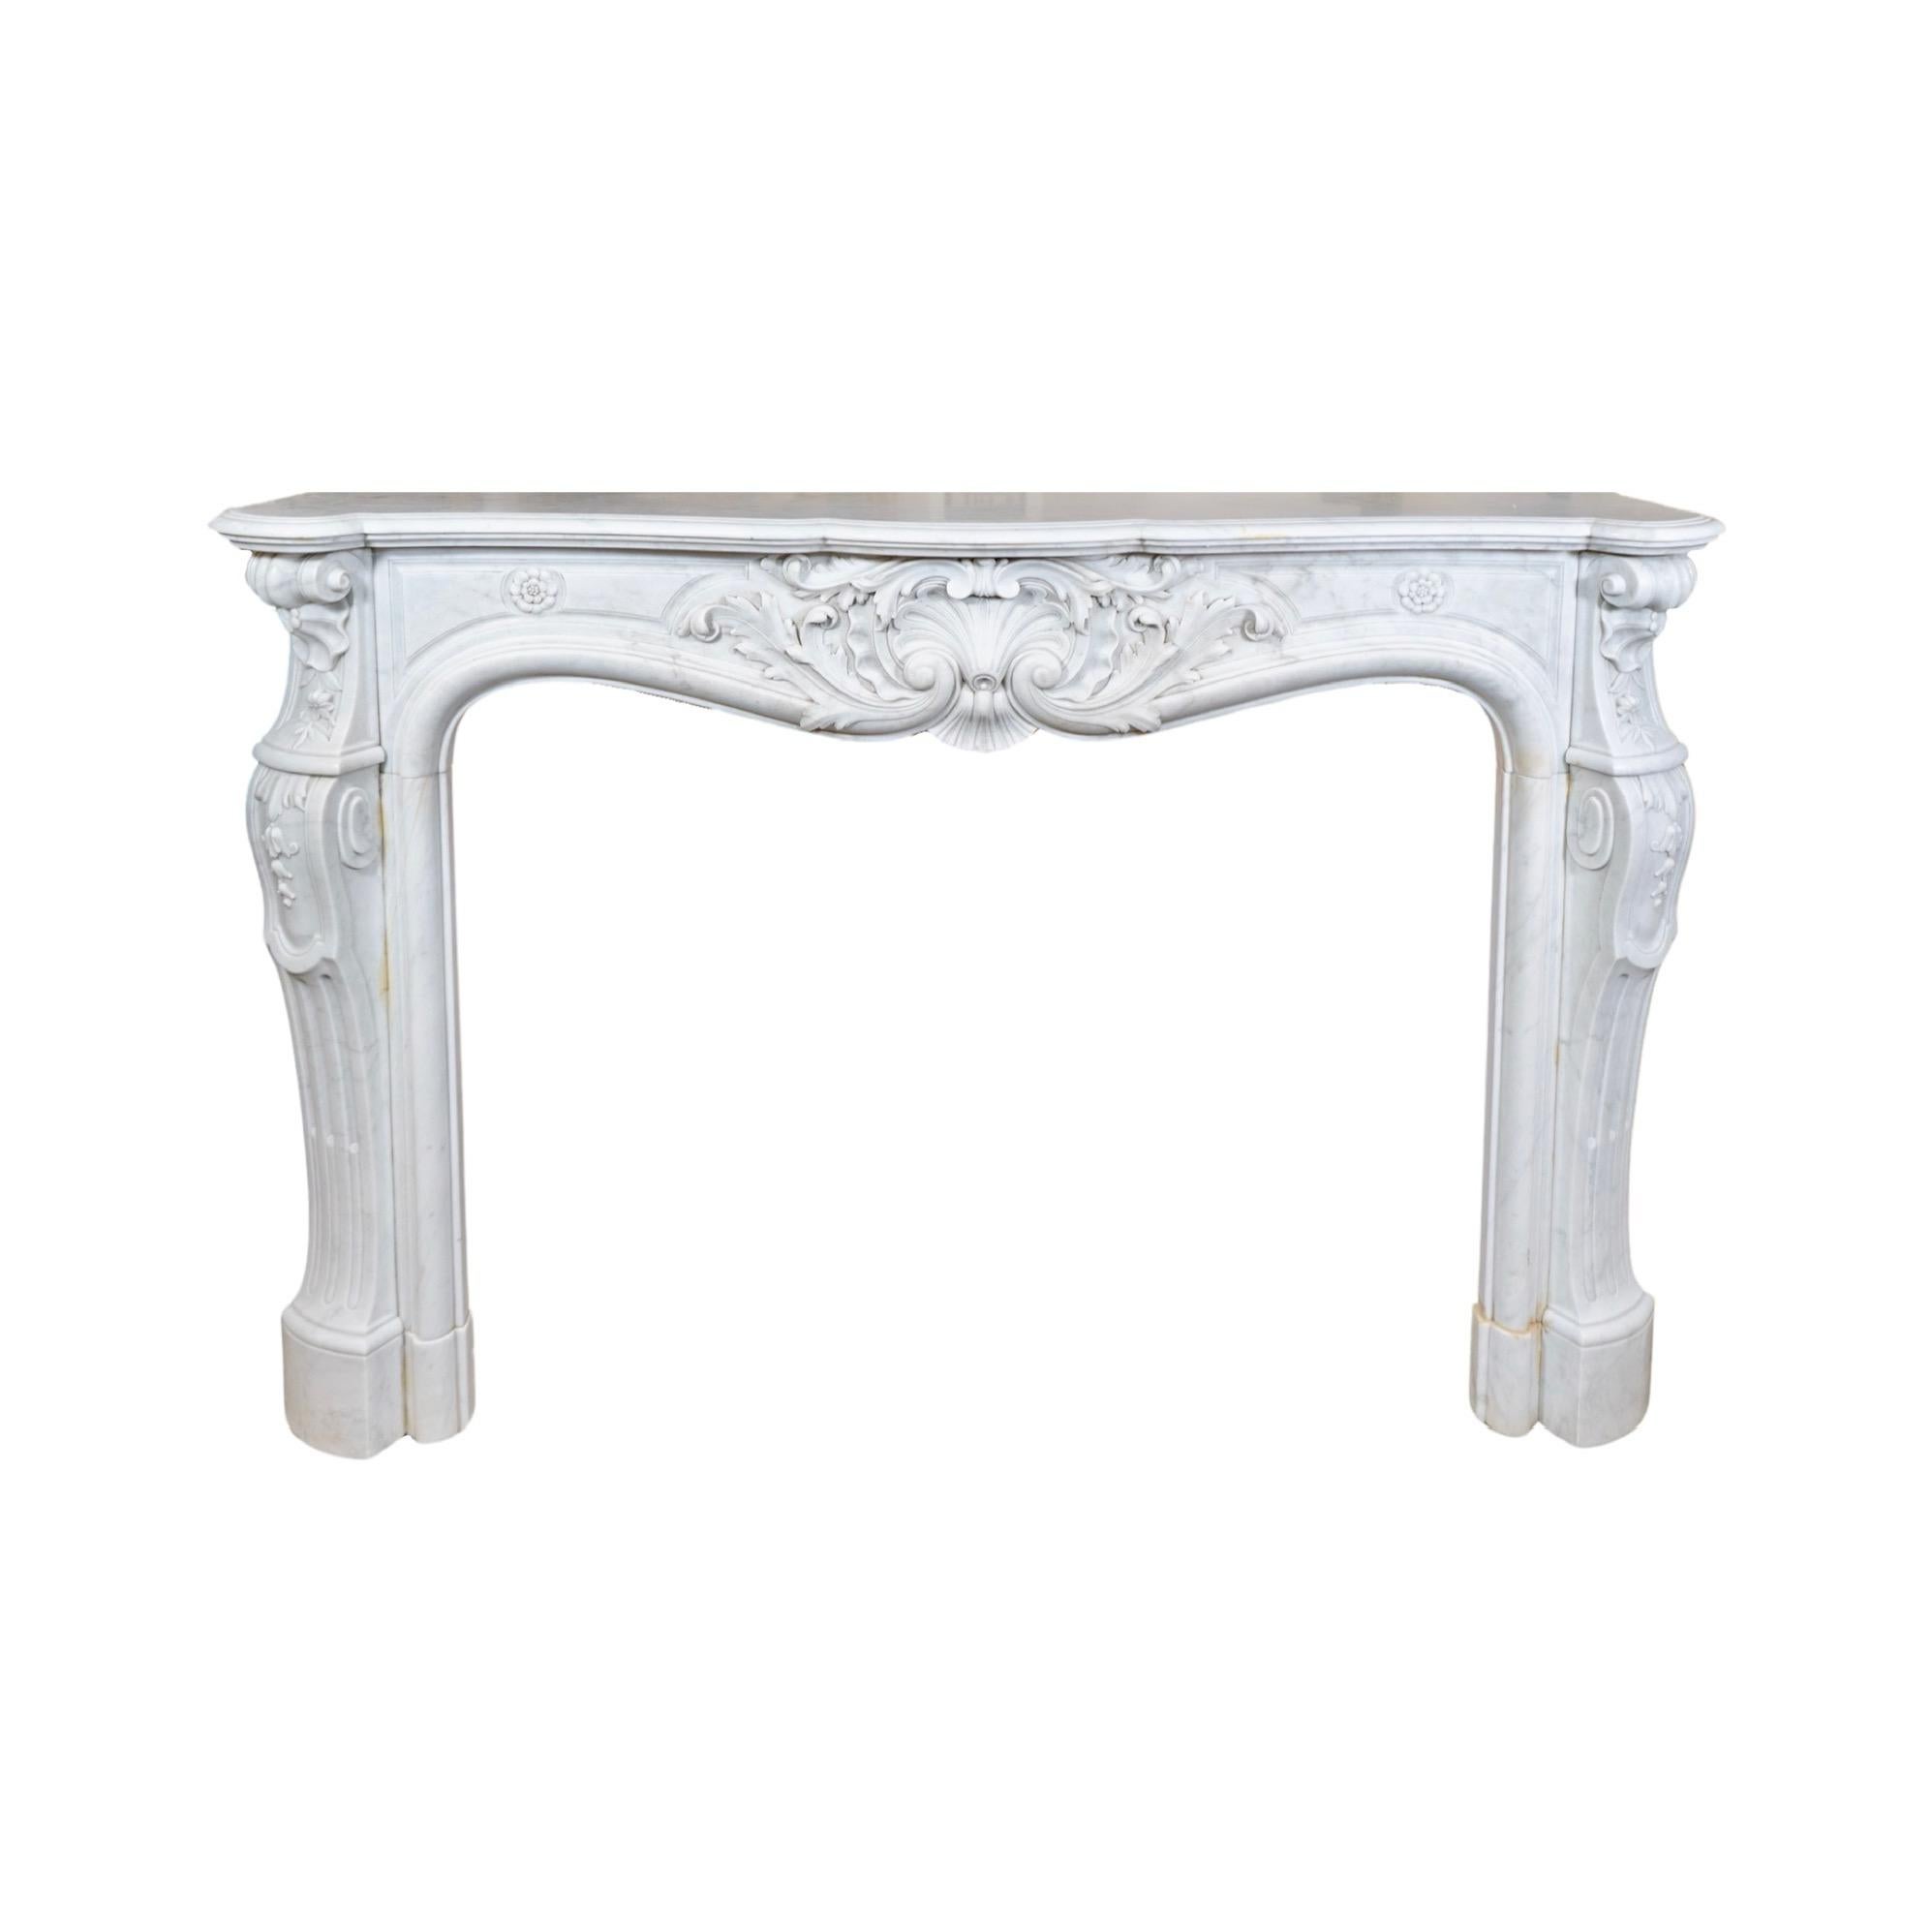 This 1870s French White Veined Carrara Marble Mantel exudes elegance and sophistication. The intricate floral carvings found throughout the legs and center add a touch of luxury to any room. Crafted from the highest quality marble, this mantel from